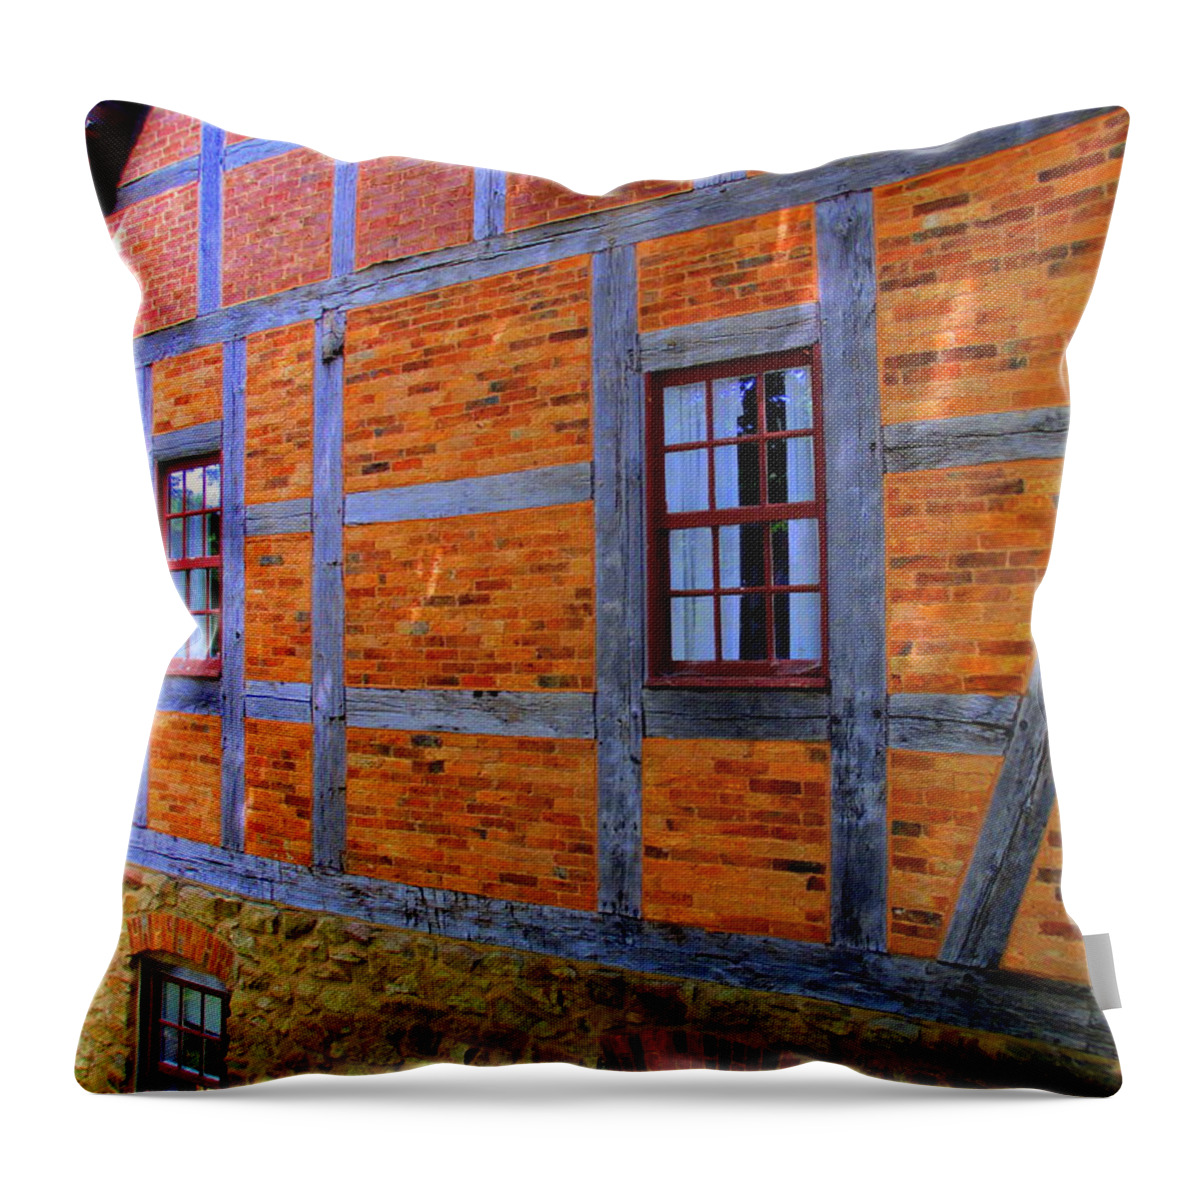 Old Salem Throw Pillow featuring the photograph Old Salem Windows 29 by Randall Weidner